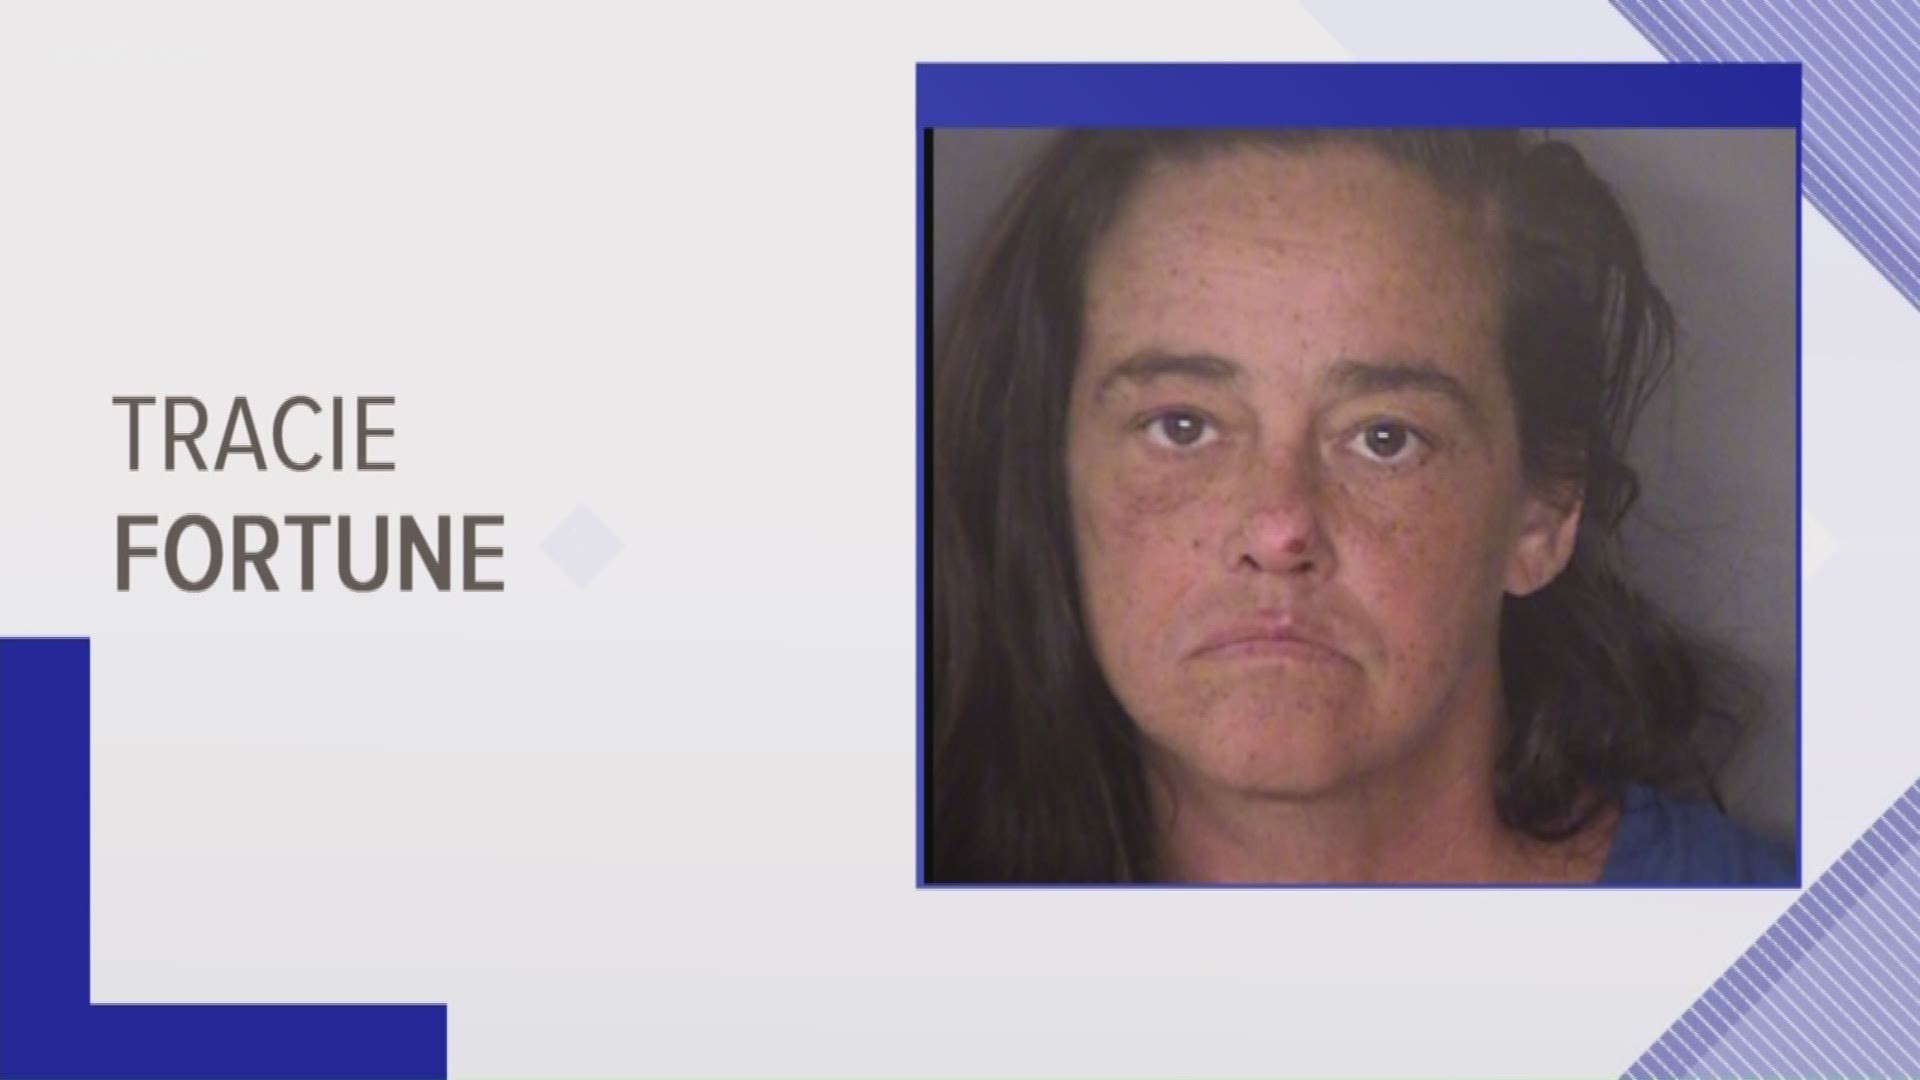 Court documents state Tracie Fortune told investigators she started the fire early on March 2 to stay warm.